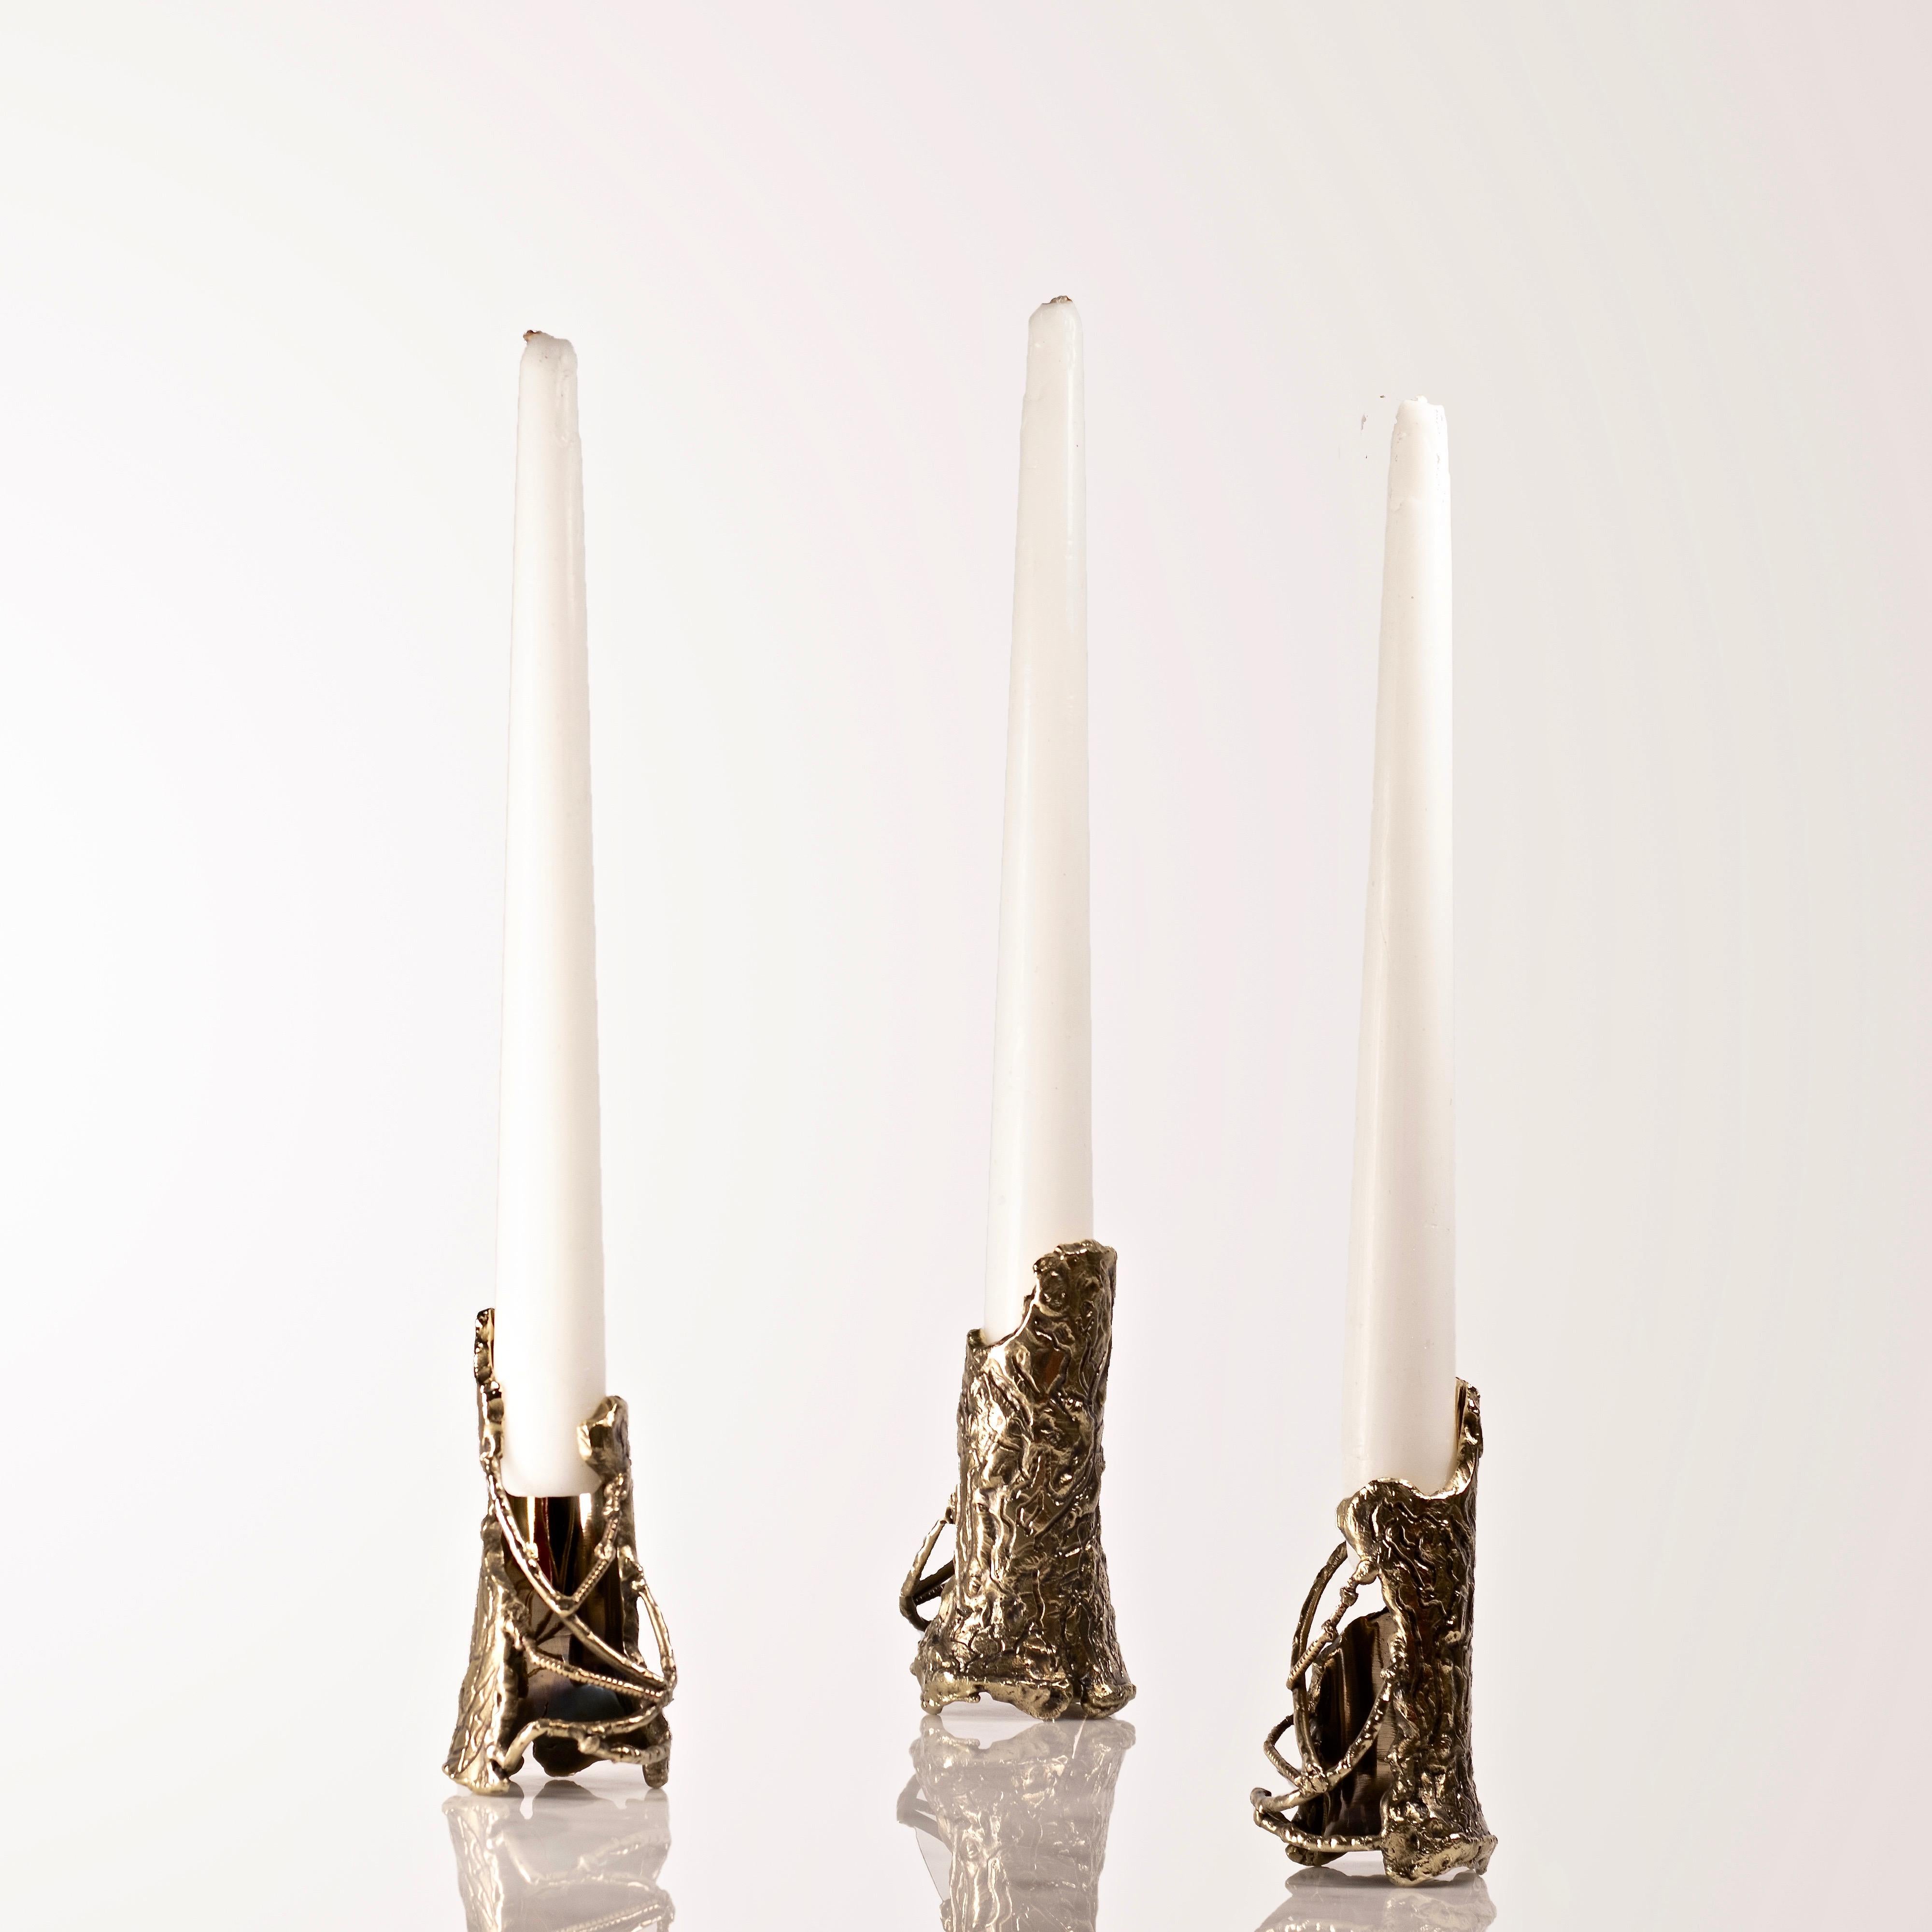 Ensemble of brass hand-sculpted candleholders by Samuel Costantini.
The three candleholders were entirely handmade by the artist.
Edition of 21+ 3 ap.
Measures: diameter 50mm, height 100 mm.
Diameter 1.9681inches, height 3.937.

Pieces of bark